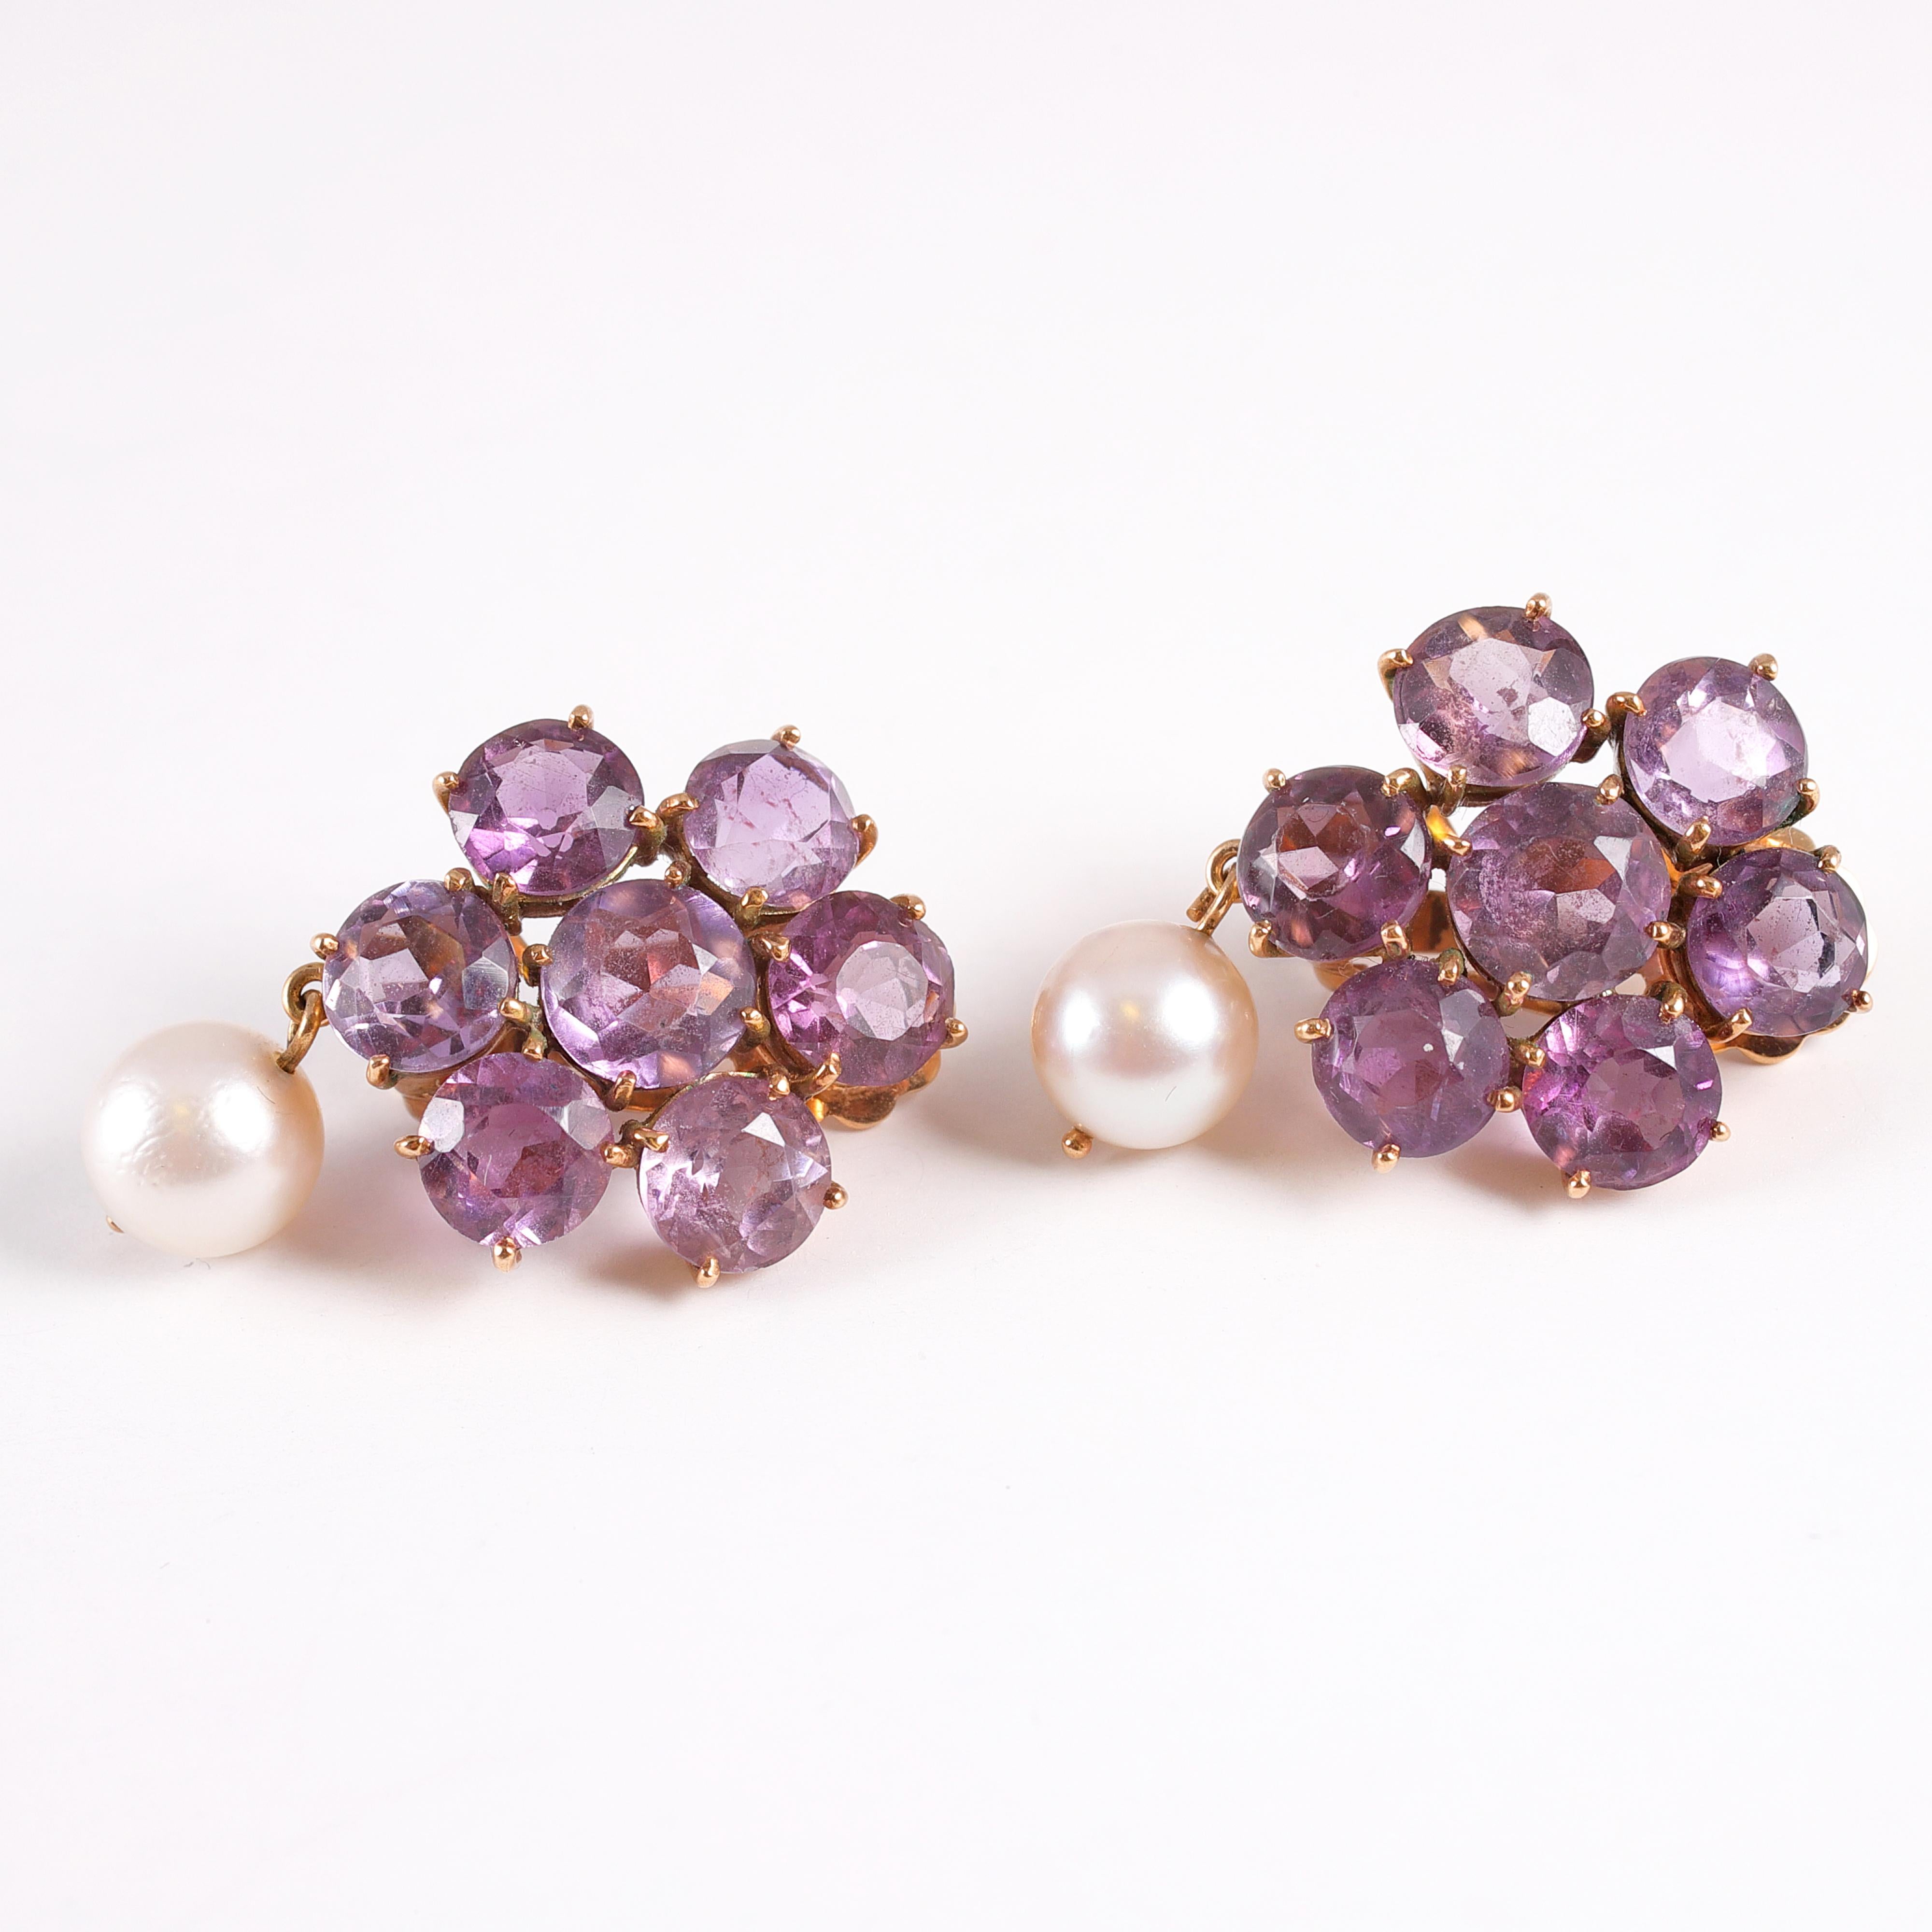 A truly lovely pair of vintage amethyst and pearl, clip on earrings.  The amethysts have a total estimated weight of 13.50 carats and the 7.00 mm cultured pearls are a perfect compliment to the beautiful purple tones!